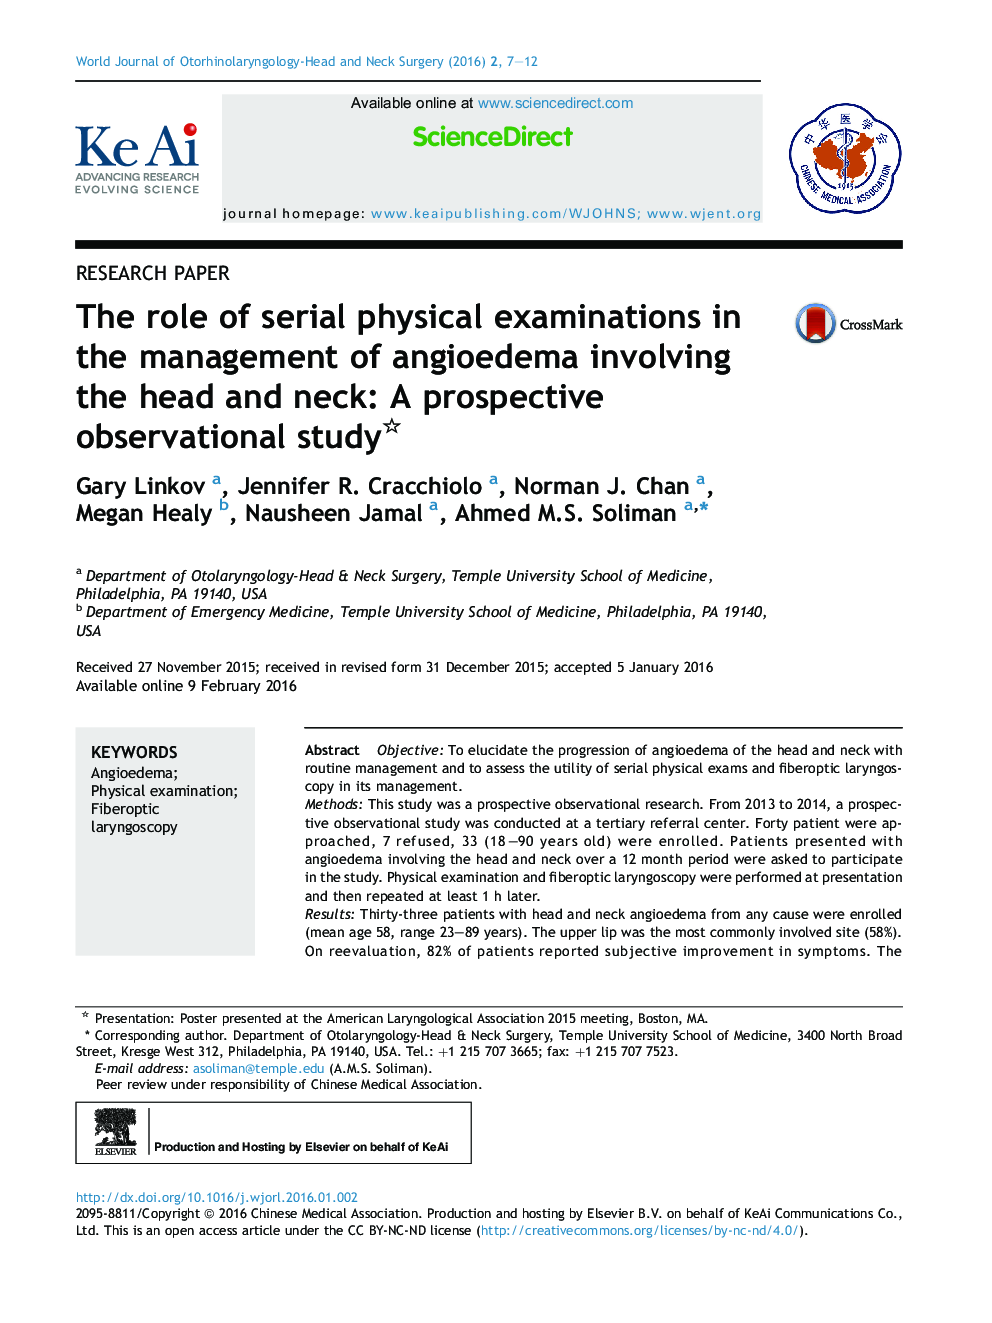 The role of serial physical examinations in the management of angioedema involving the head and neck: A prospective observational study 